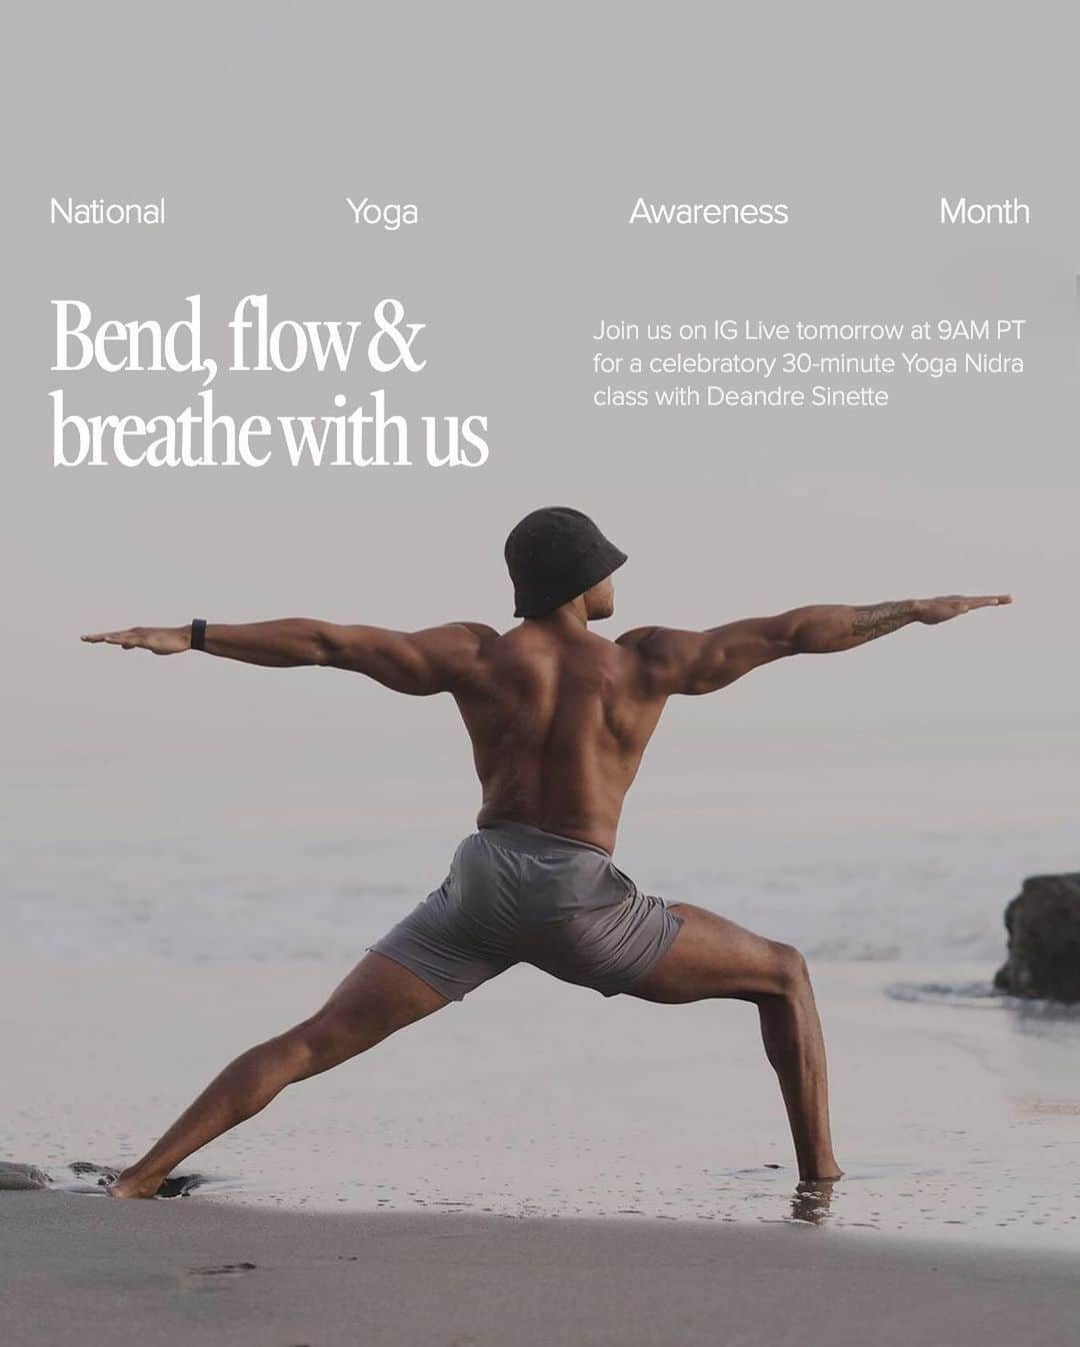 ALO Yogaのインスタグラム：「We are closing out #NationalYogaAwarenessMonth with a Yoga Nidra experience led by Deandre - join him tomorrow on IG LIVE at 9am for 30 minutes of yoga bliss 💫✨ Tag your yoga bestie to join you!」